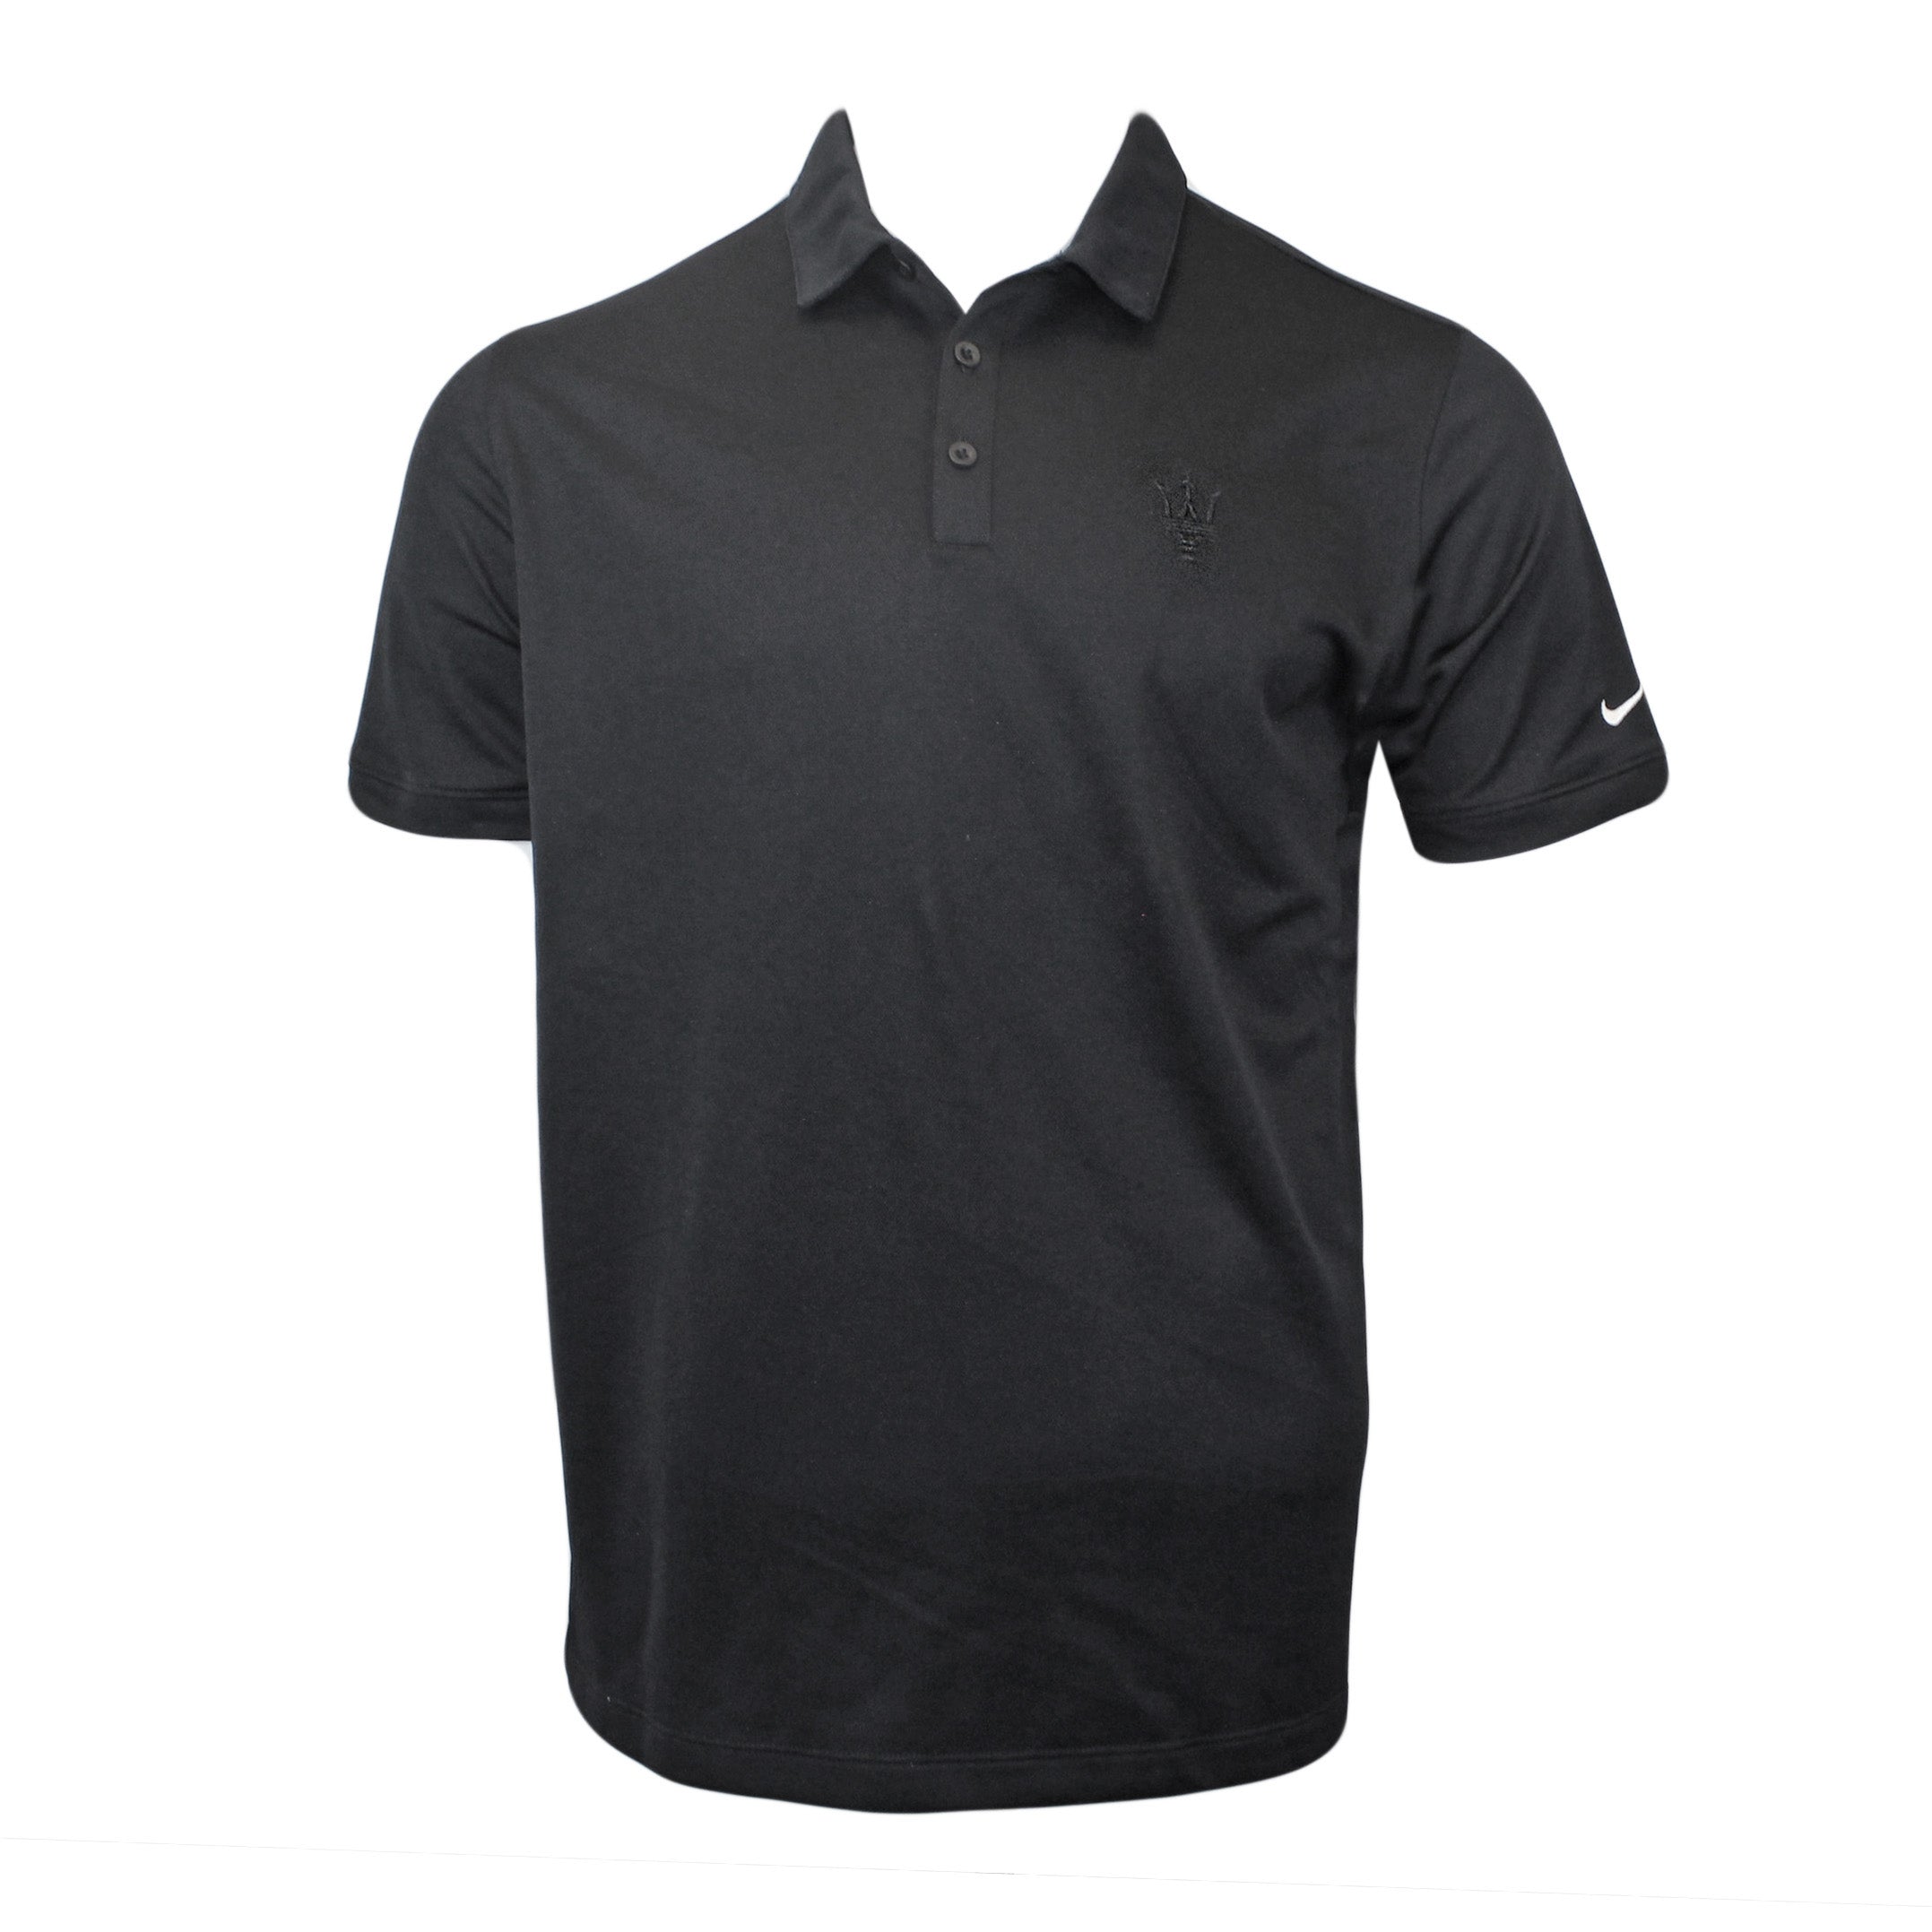 Men's Nike Dry-Fit Polo